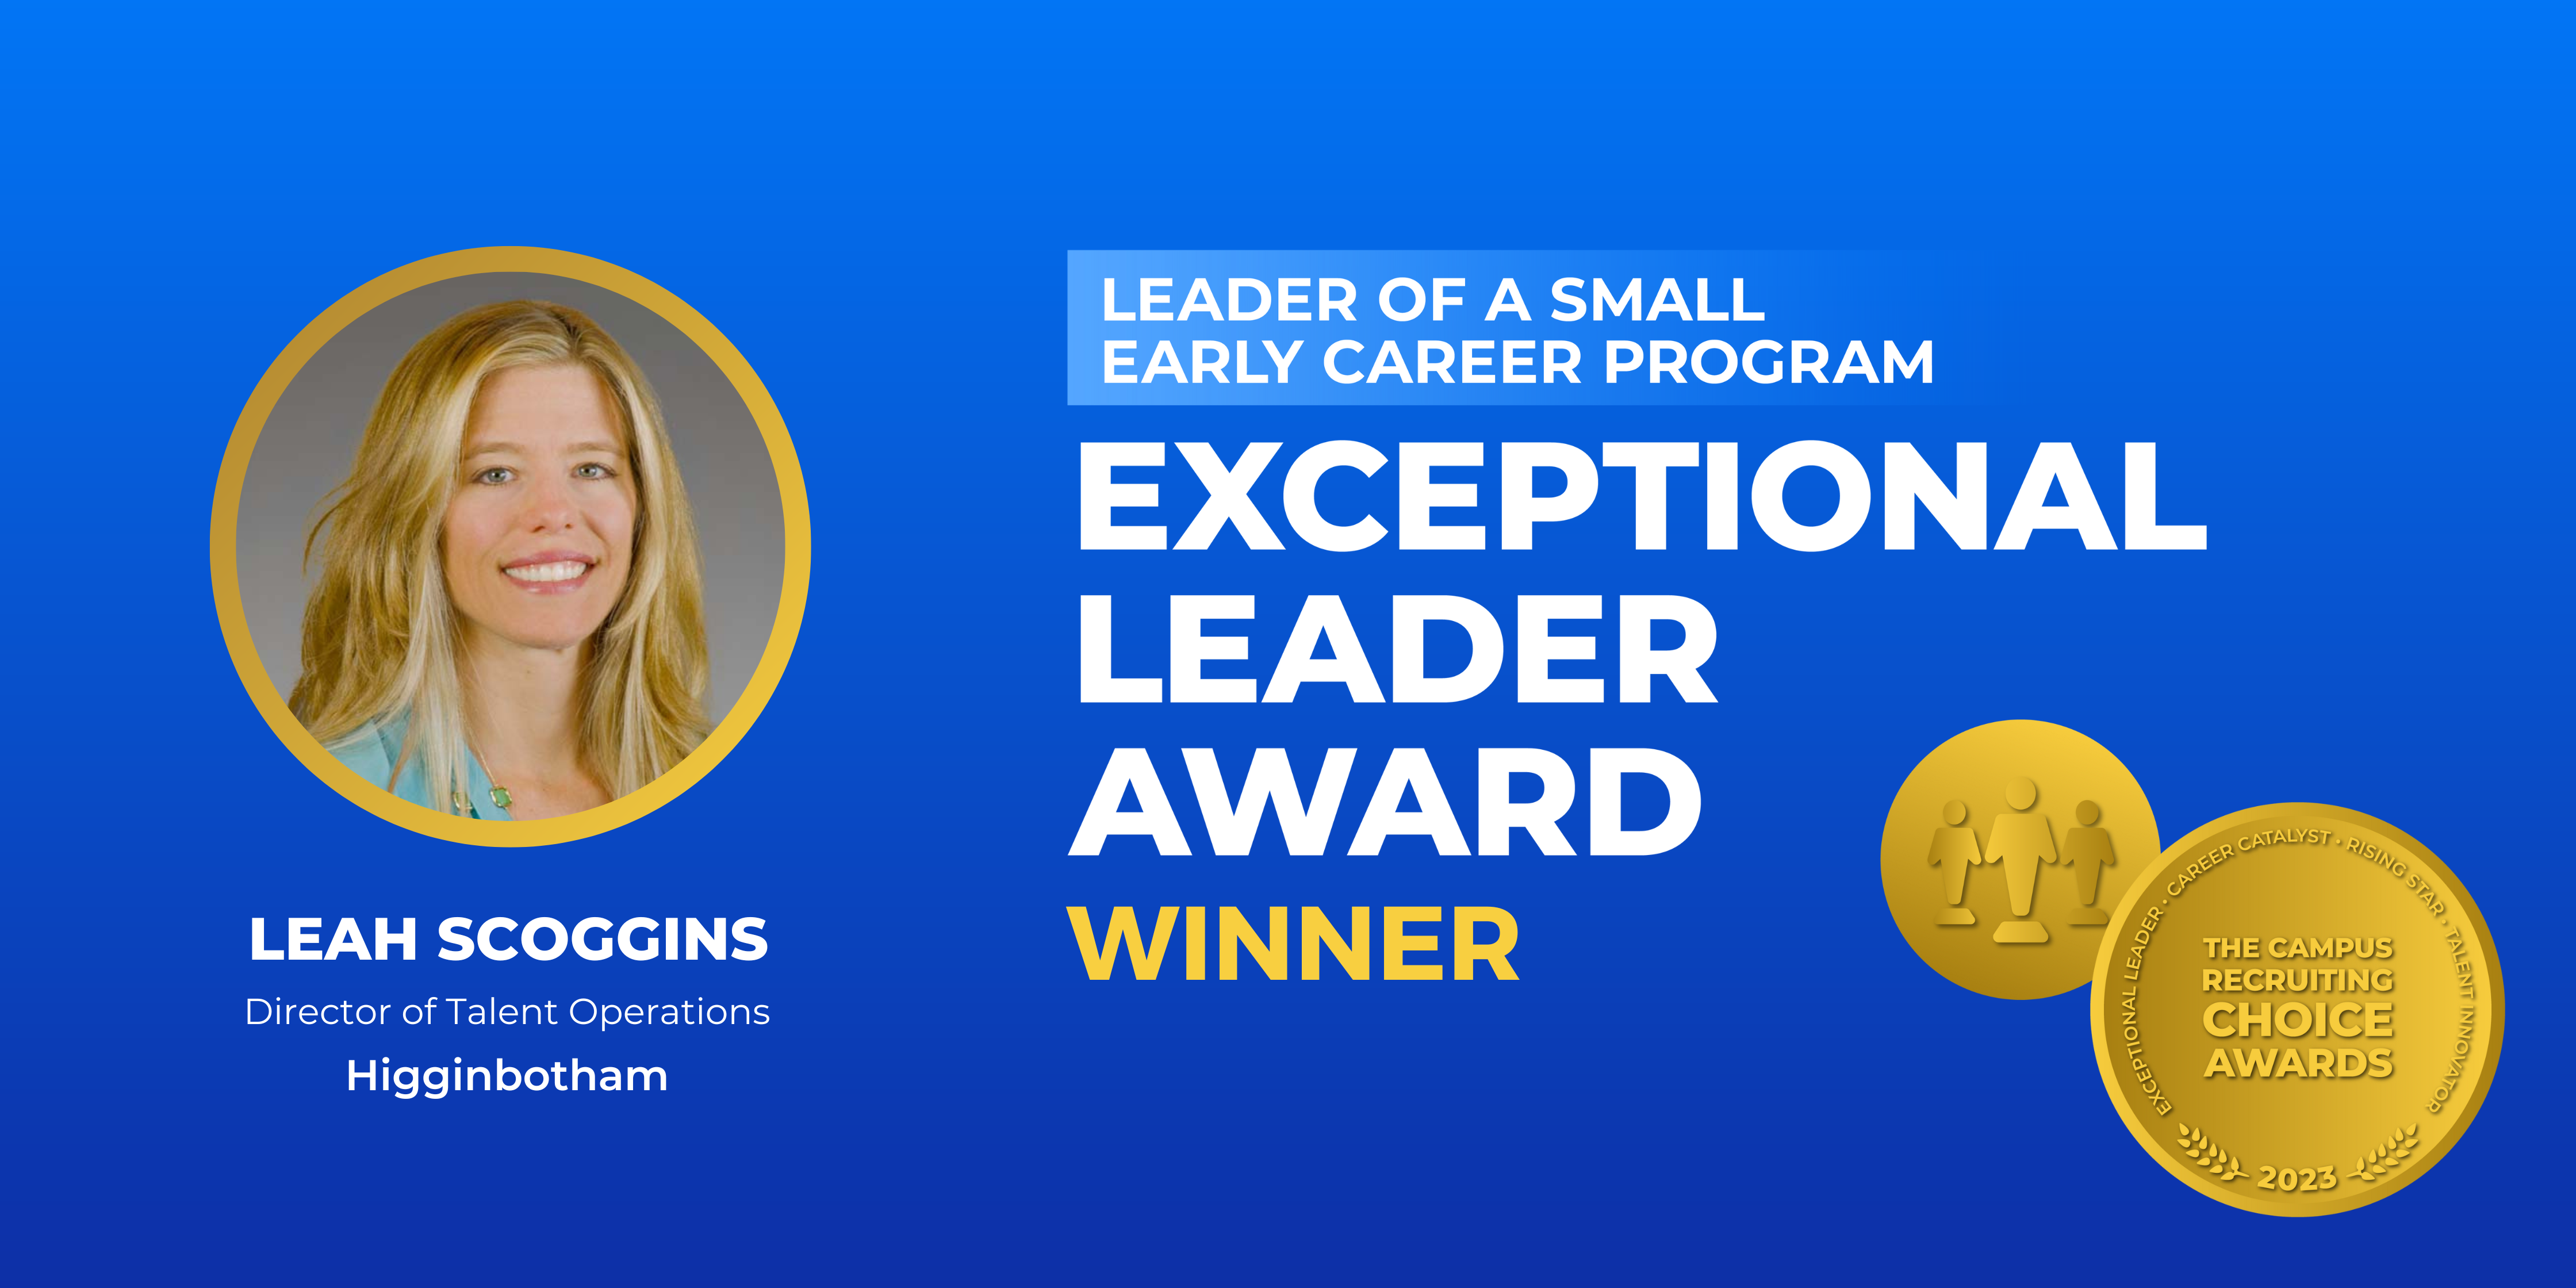 EXCEPTIONAL LEADER - Leader of a Small Early Career Program - Winner - Leah Scoggins